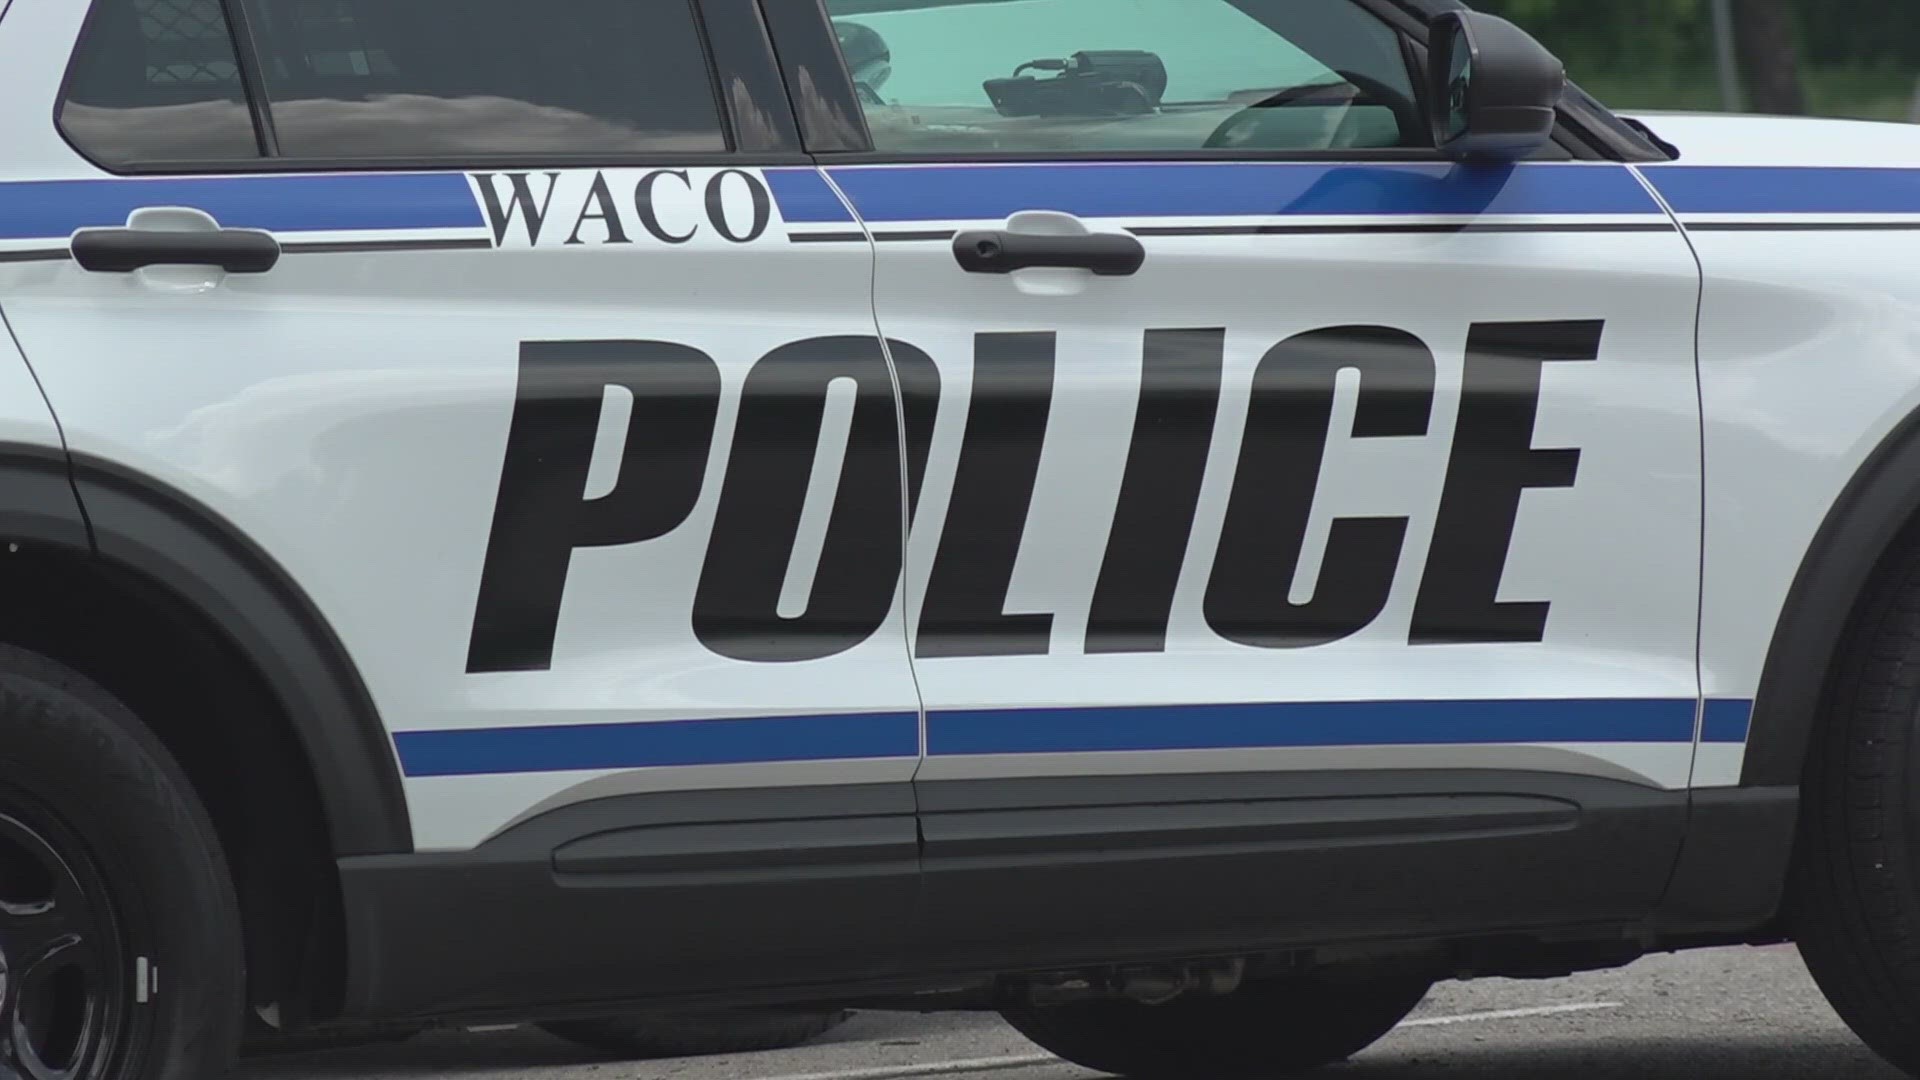 Waco Police showed up to the wrong house, when a dog jumped on them, an officer shot the dog.